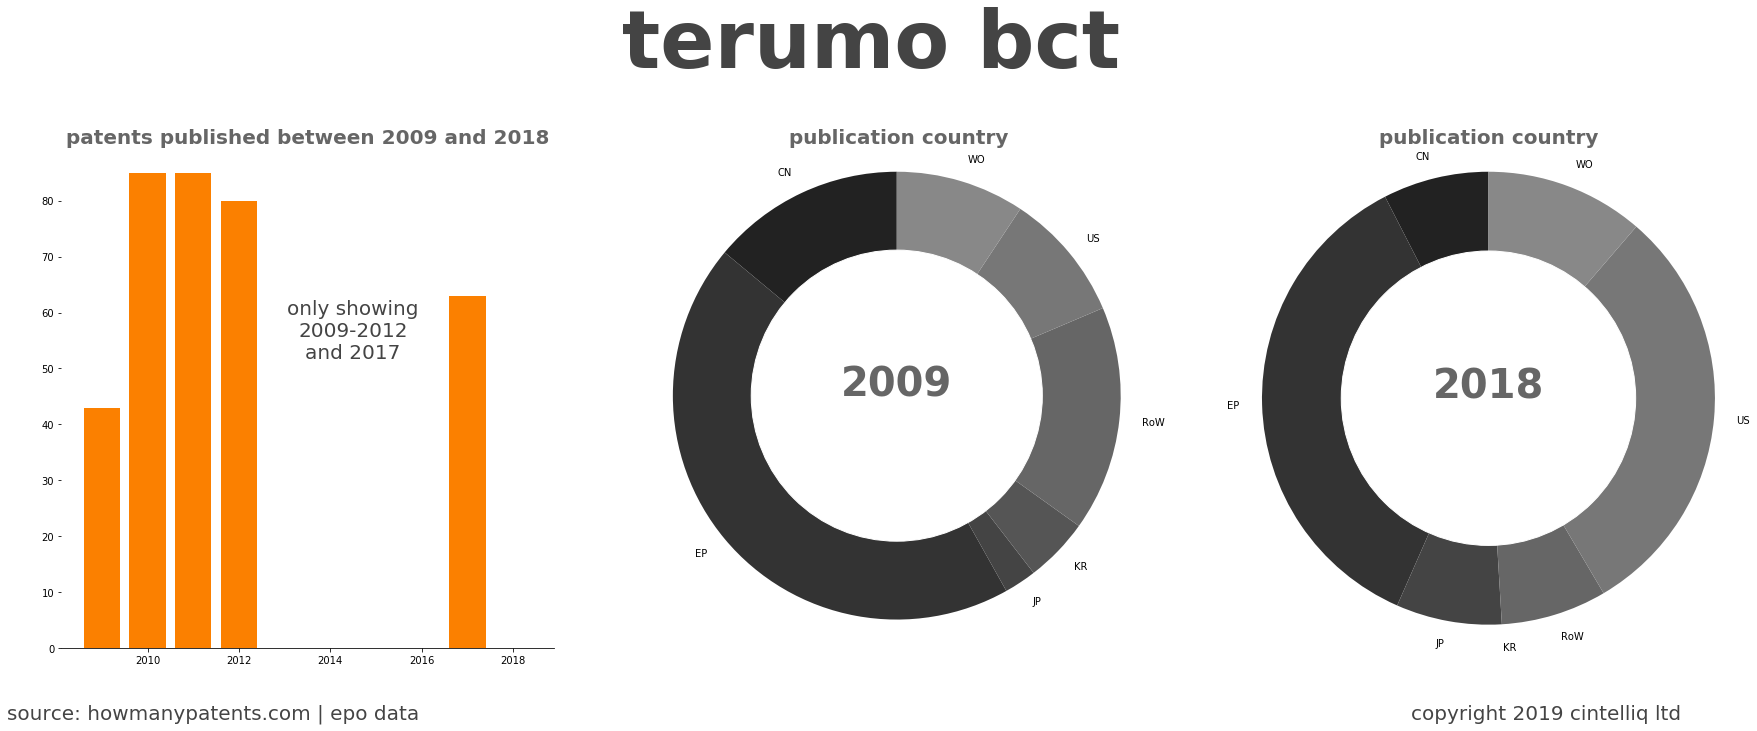 summary of patents for Terumo Bct